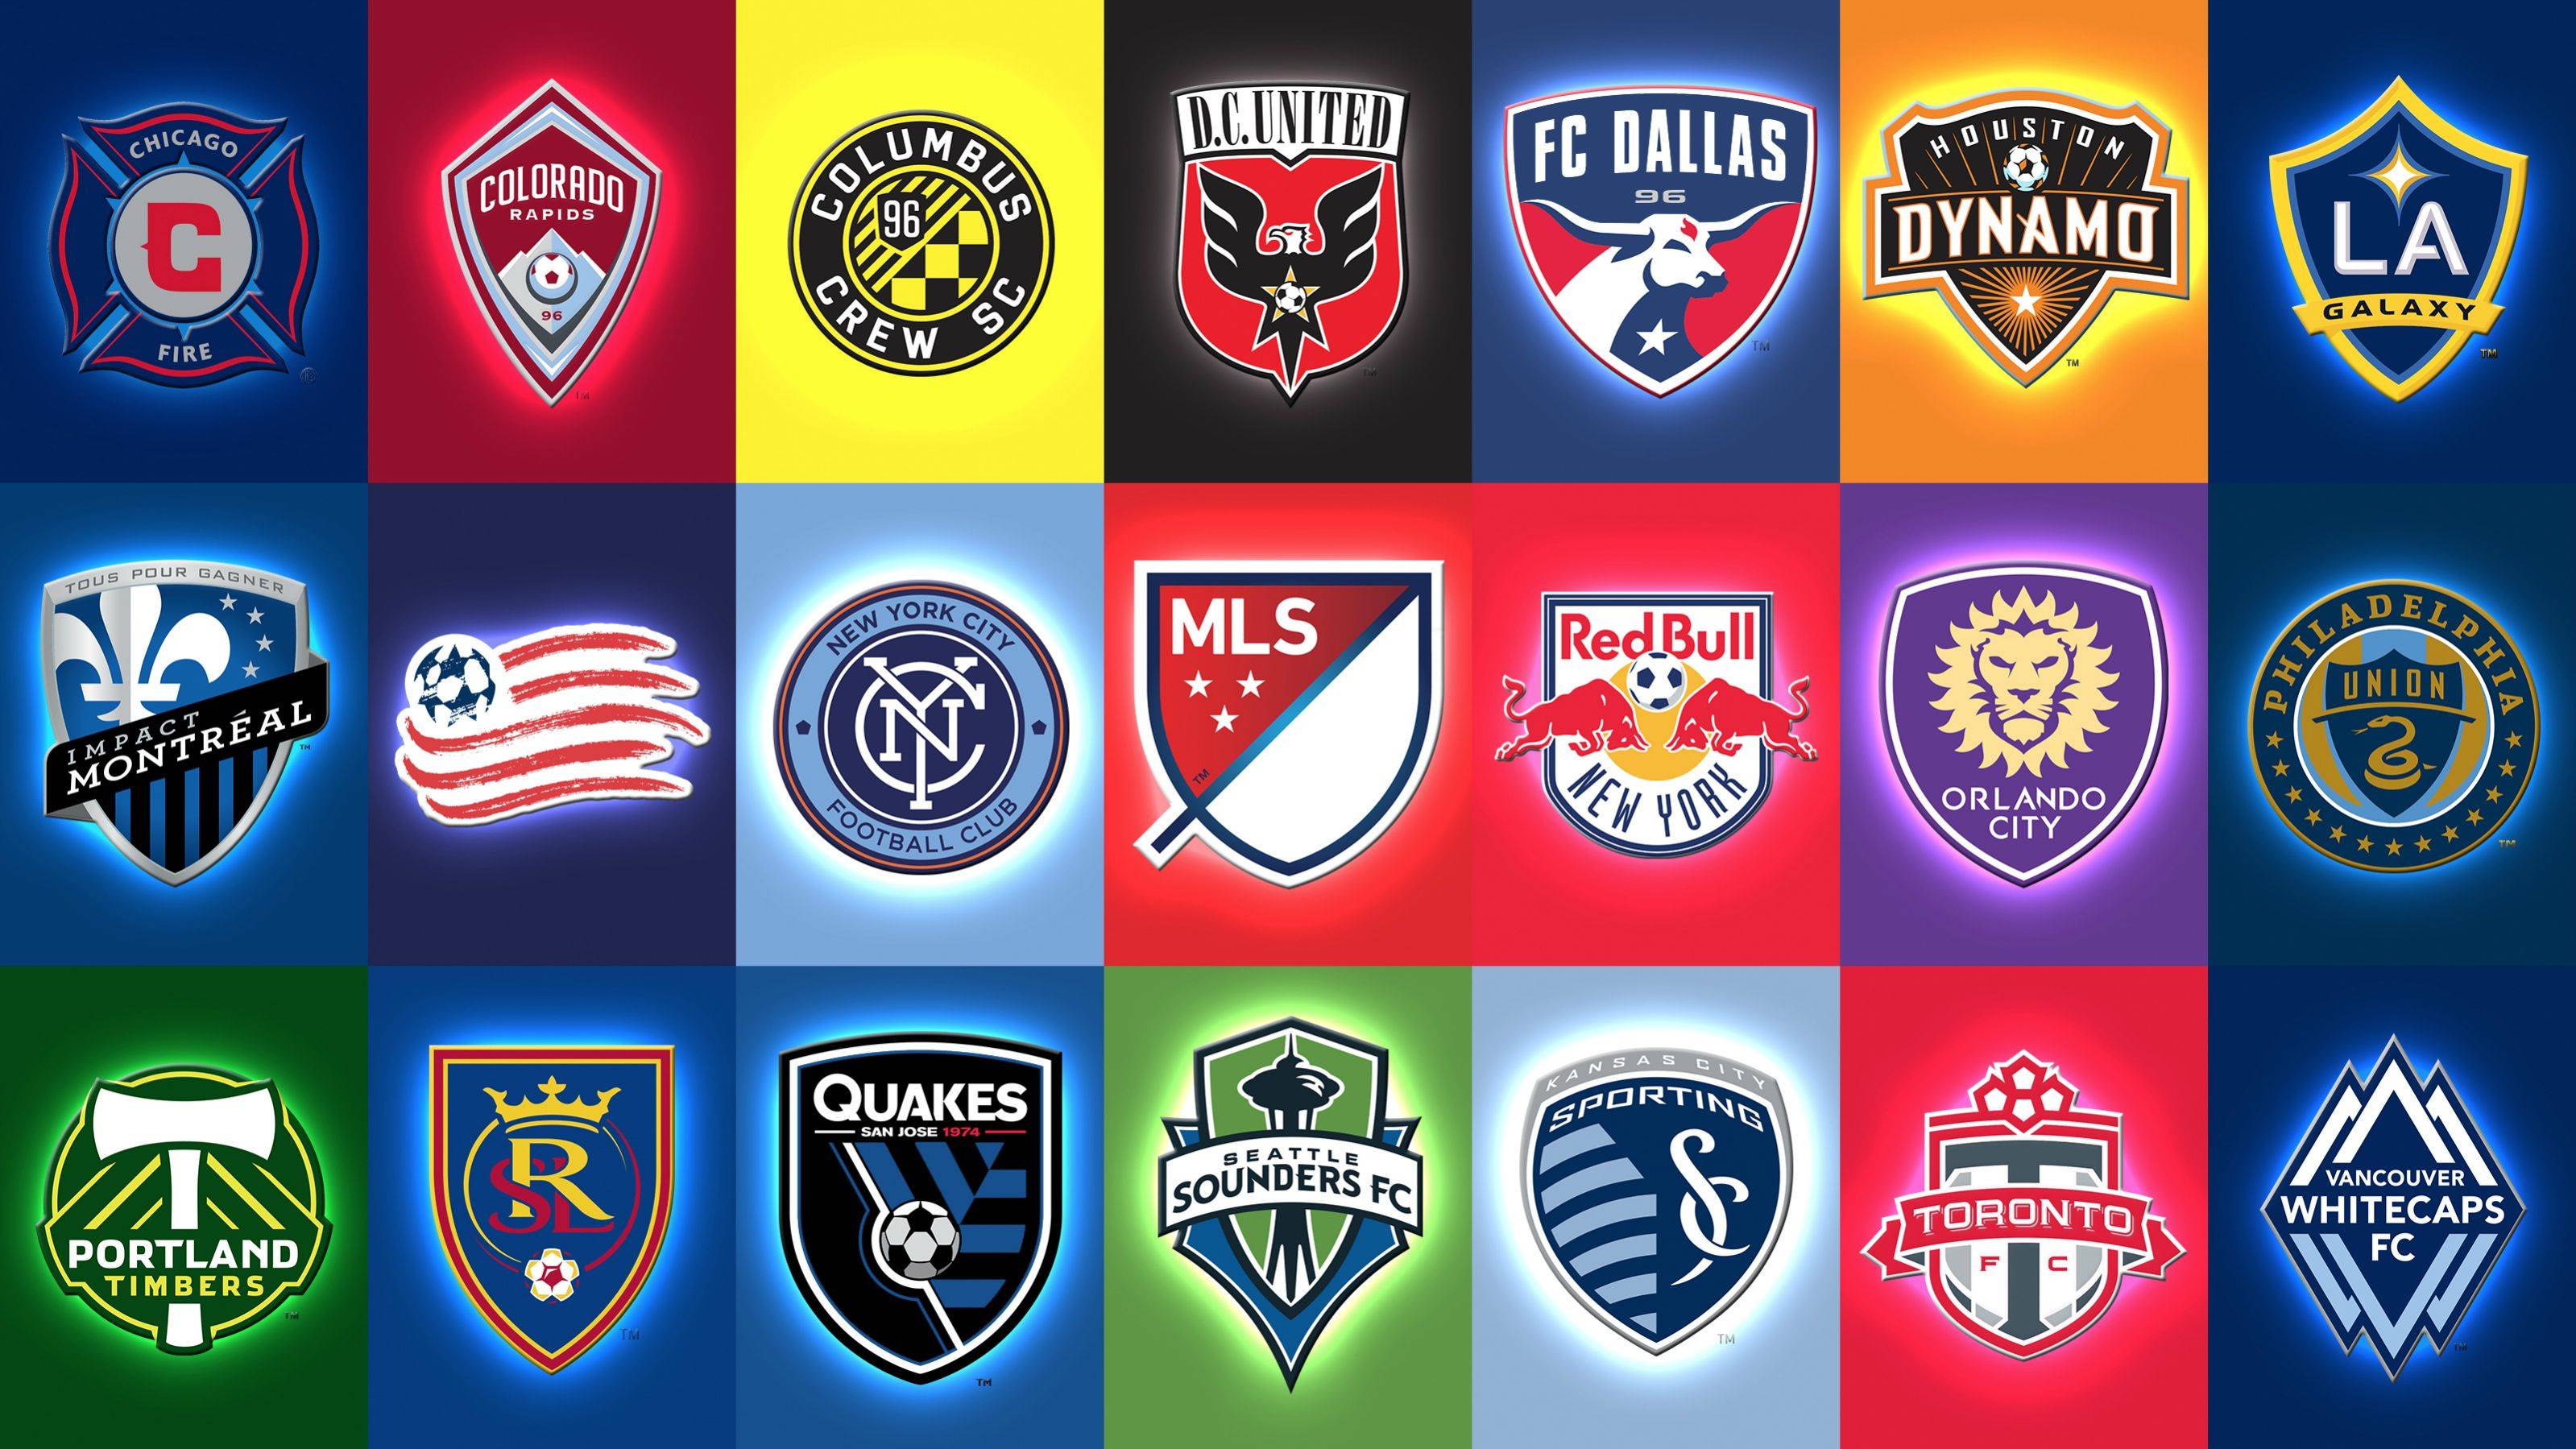 I made an MLS wallpaper because I'm snowed in. You can use it if